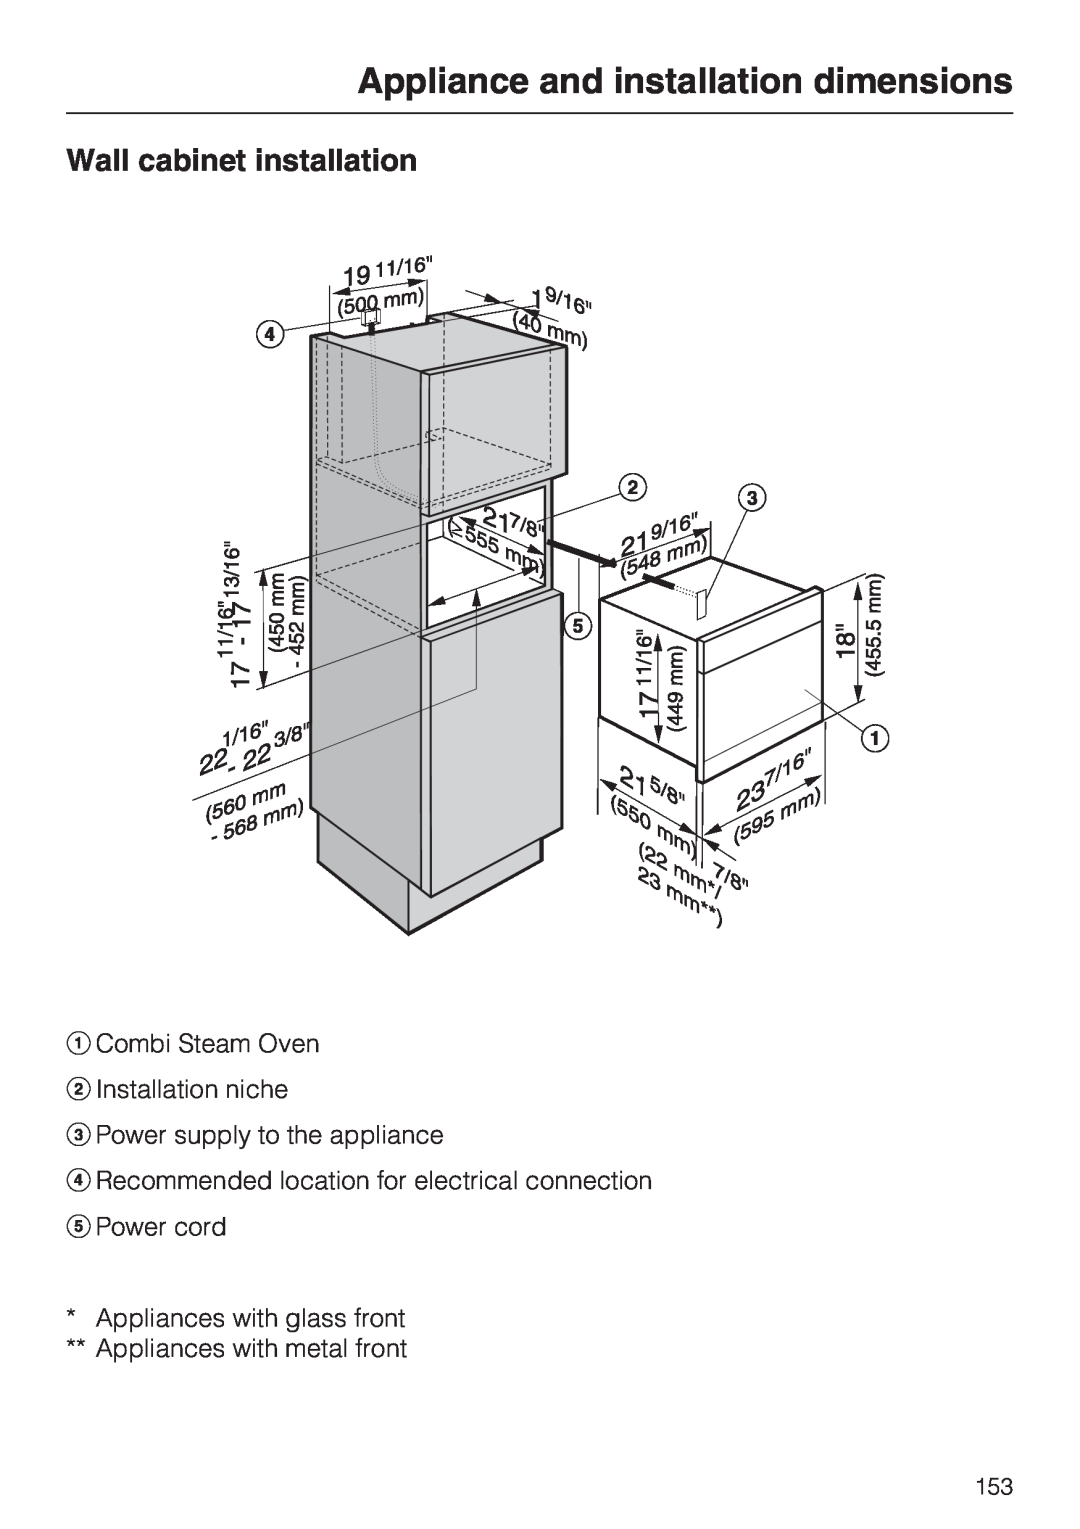 Miele 09 855 050 installation instructions Appliance and installation dimensions, Wall cabinet installation 